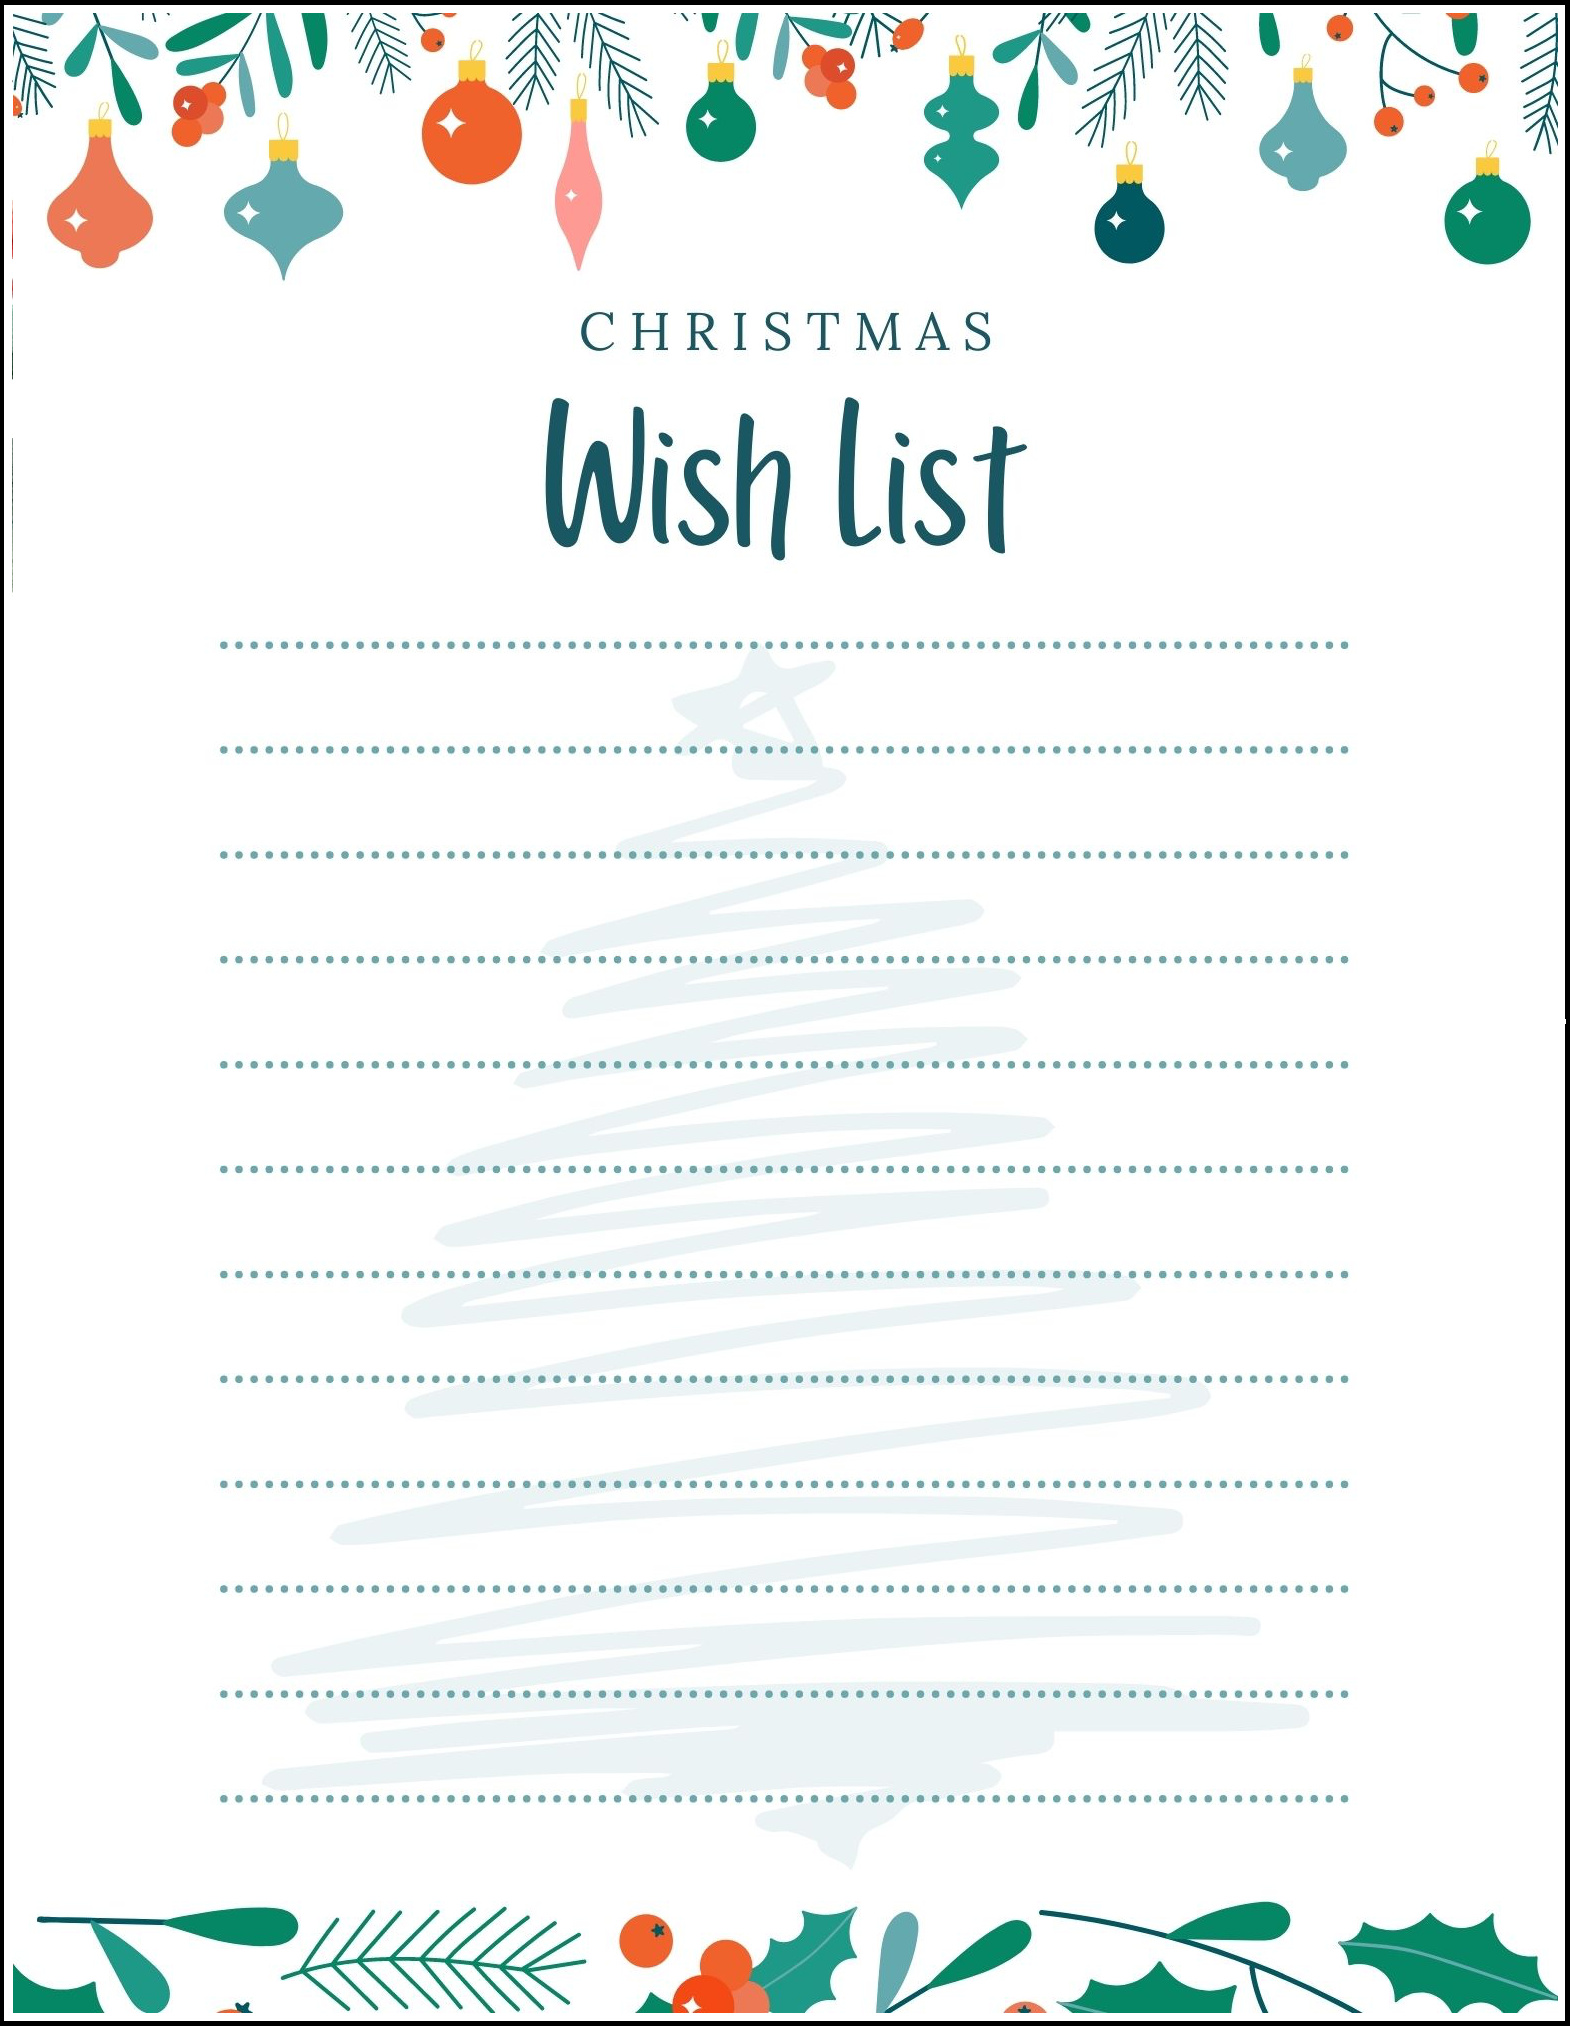 christmas wish list with tree in background and ornament boarder